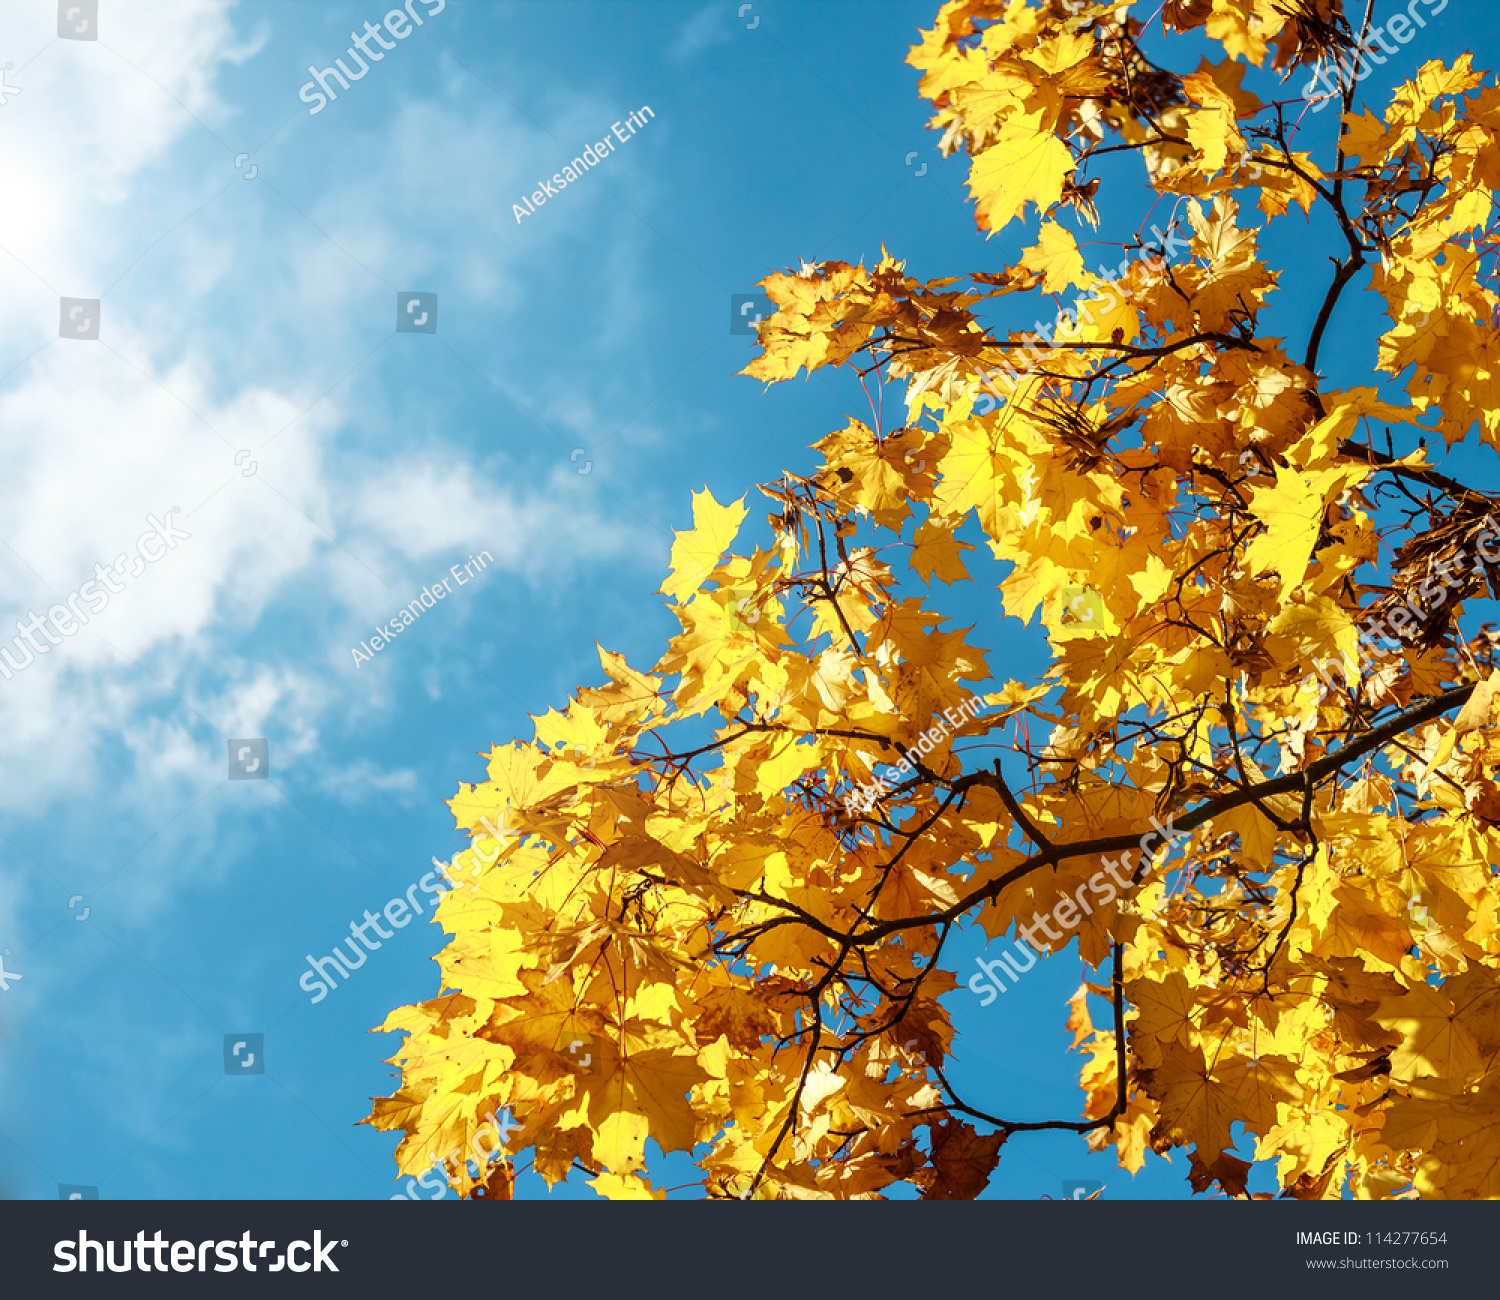 Autumn leaves with the blue sky background #114277654